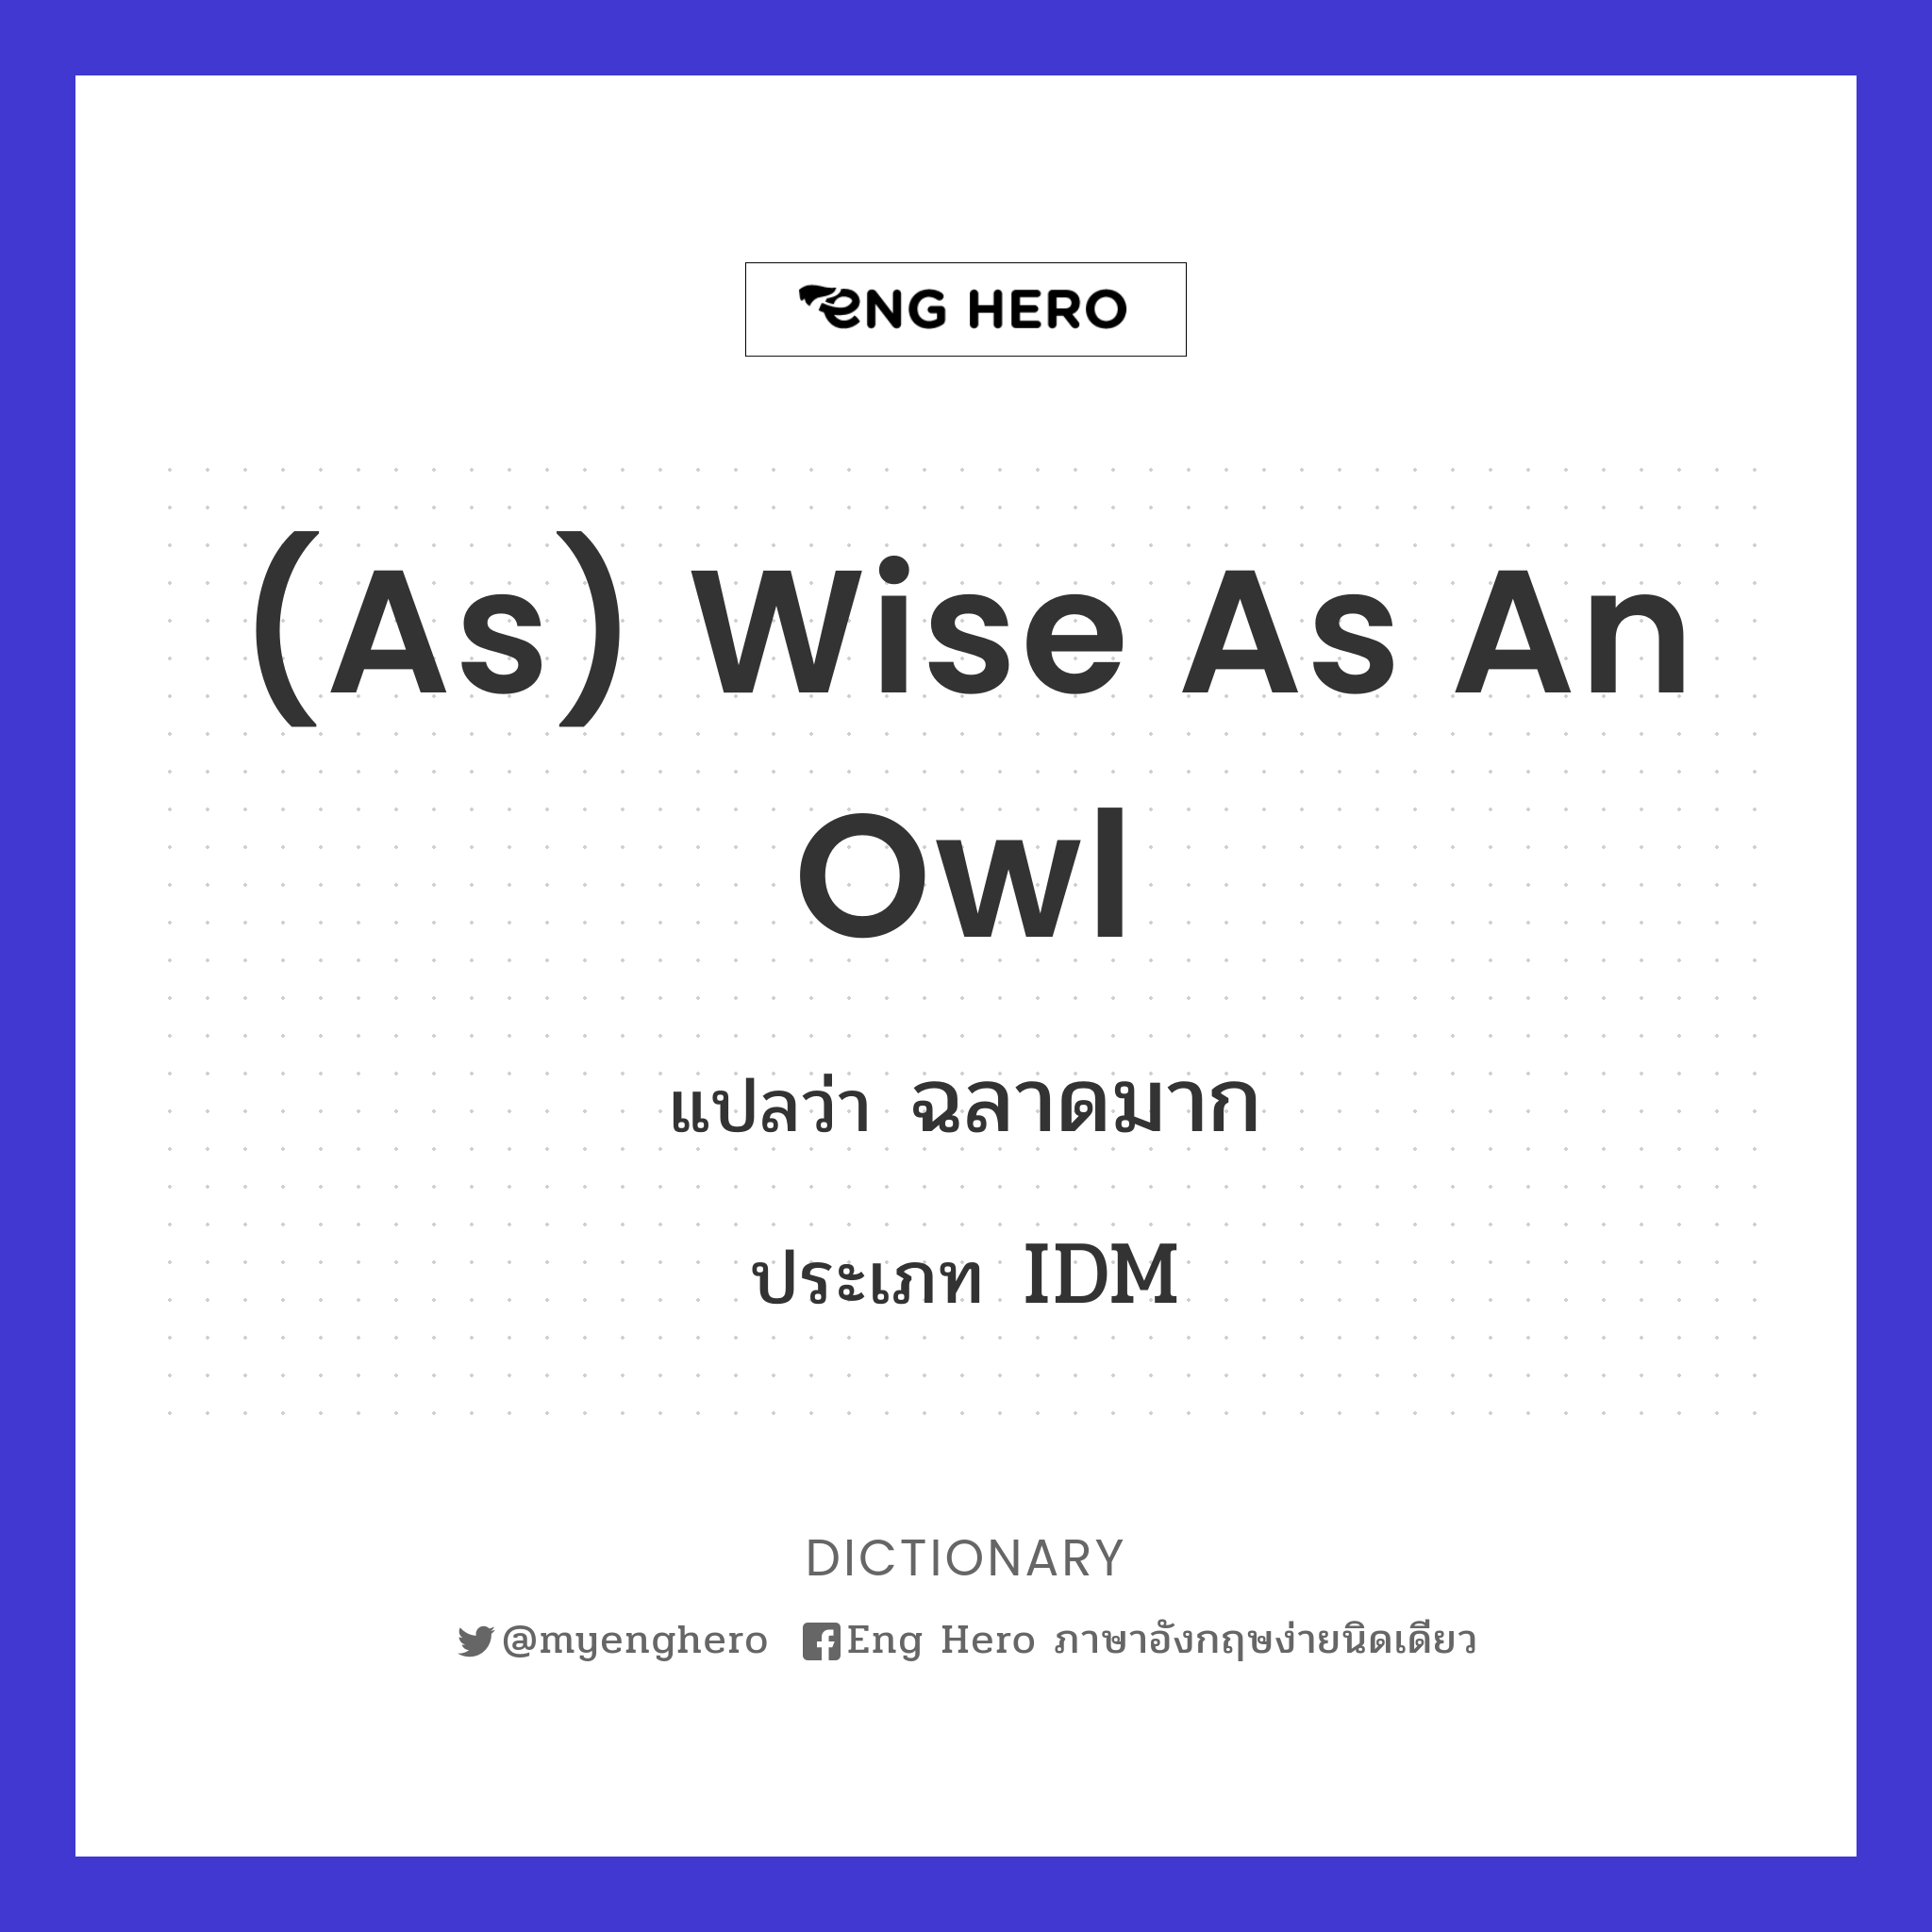 (as) wise as an owl